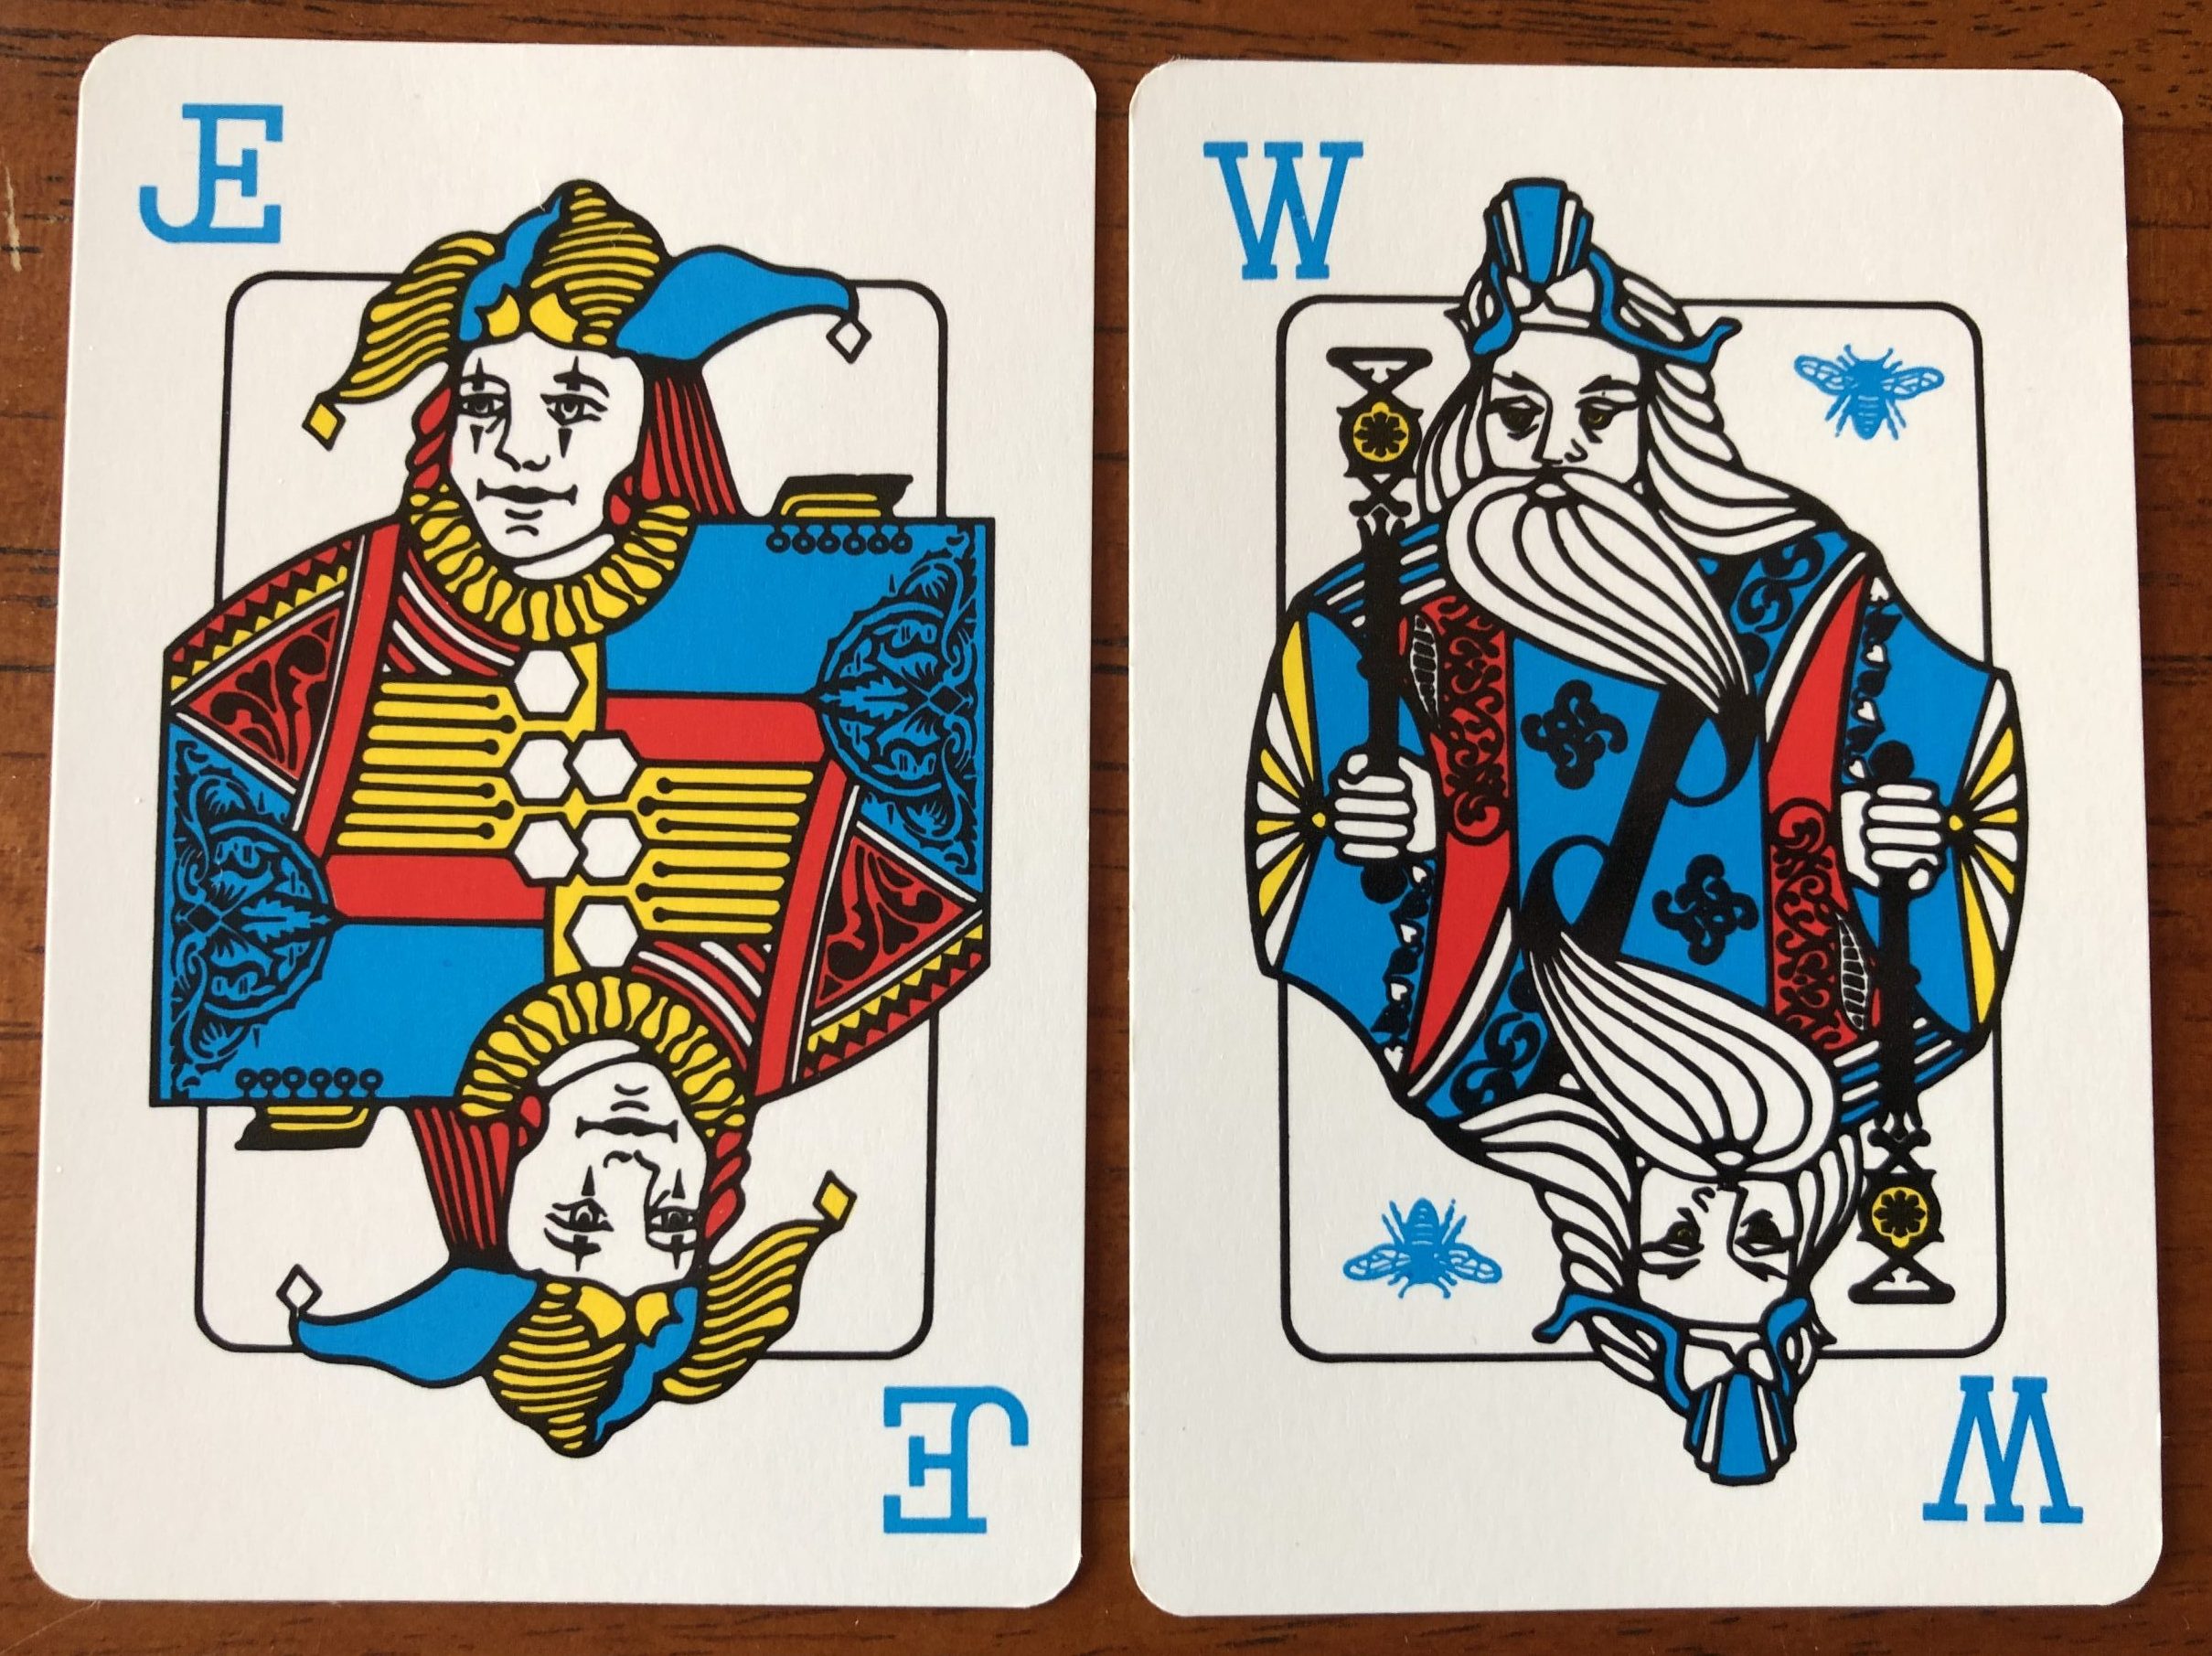 Jester card and Wizard card, for Wizard card game